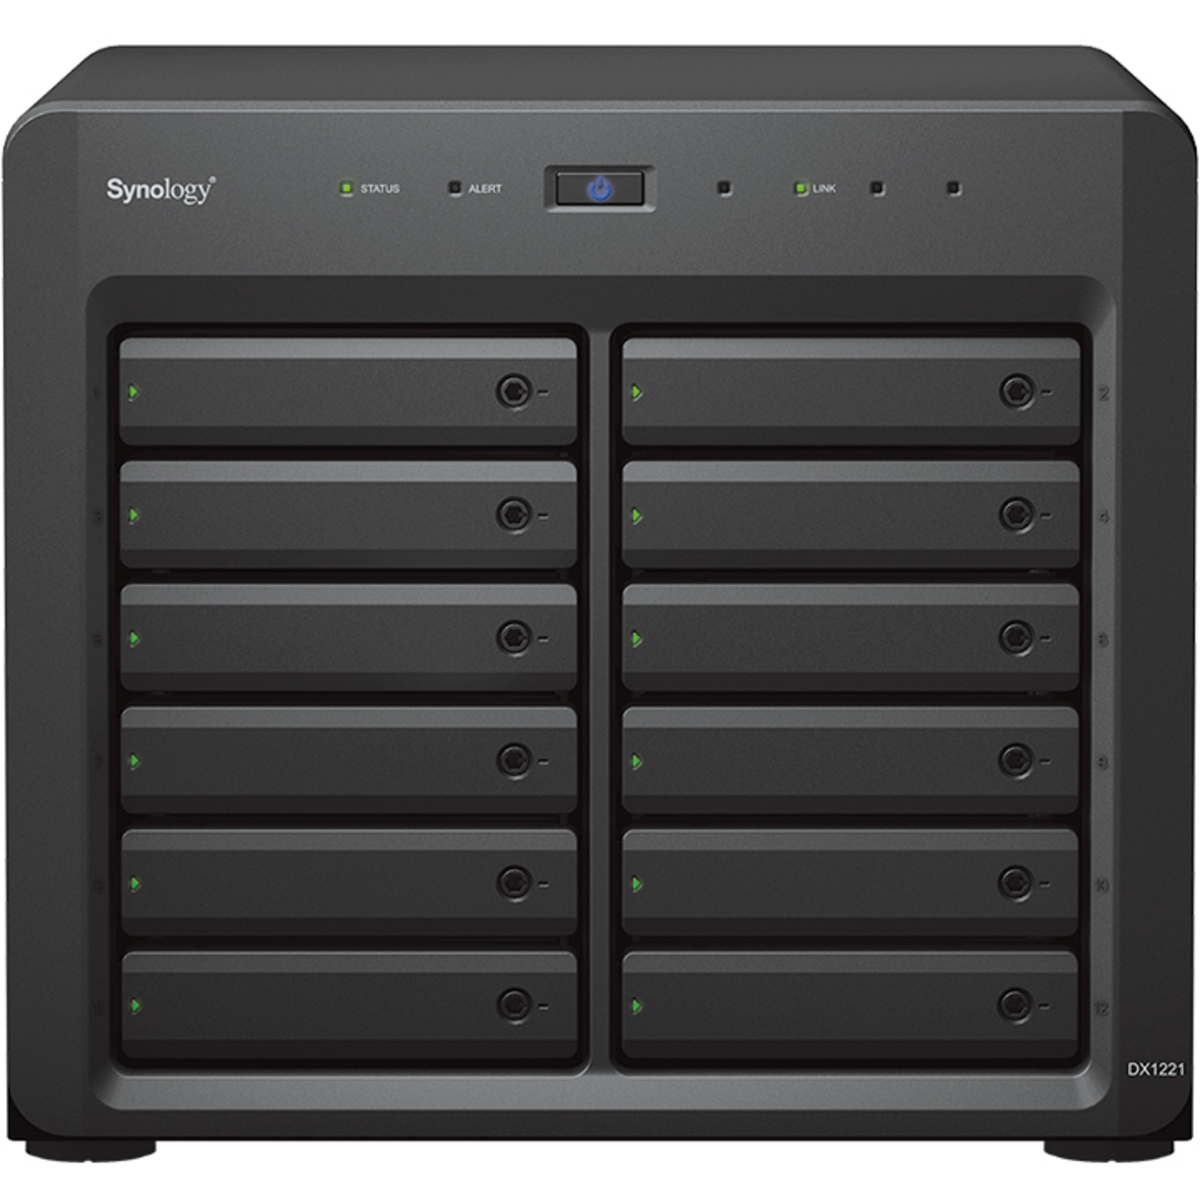 Synology DX1222 External Expansion Drive 42tb 12-Bay Desktop Multimedia / Power User / Business Expansion Enclosure 7x6tb Western Digital Red Pro WD6003FFBX 3.5 7200rpm SATA 6Gb/s HDD NAS Class Drives Installed - Burn-In Tested DX1222 External Expansion Drive